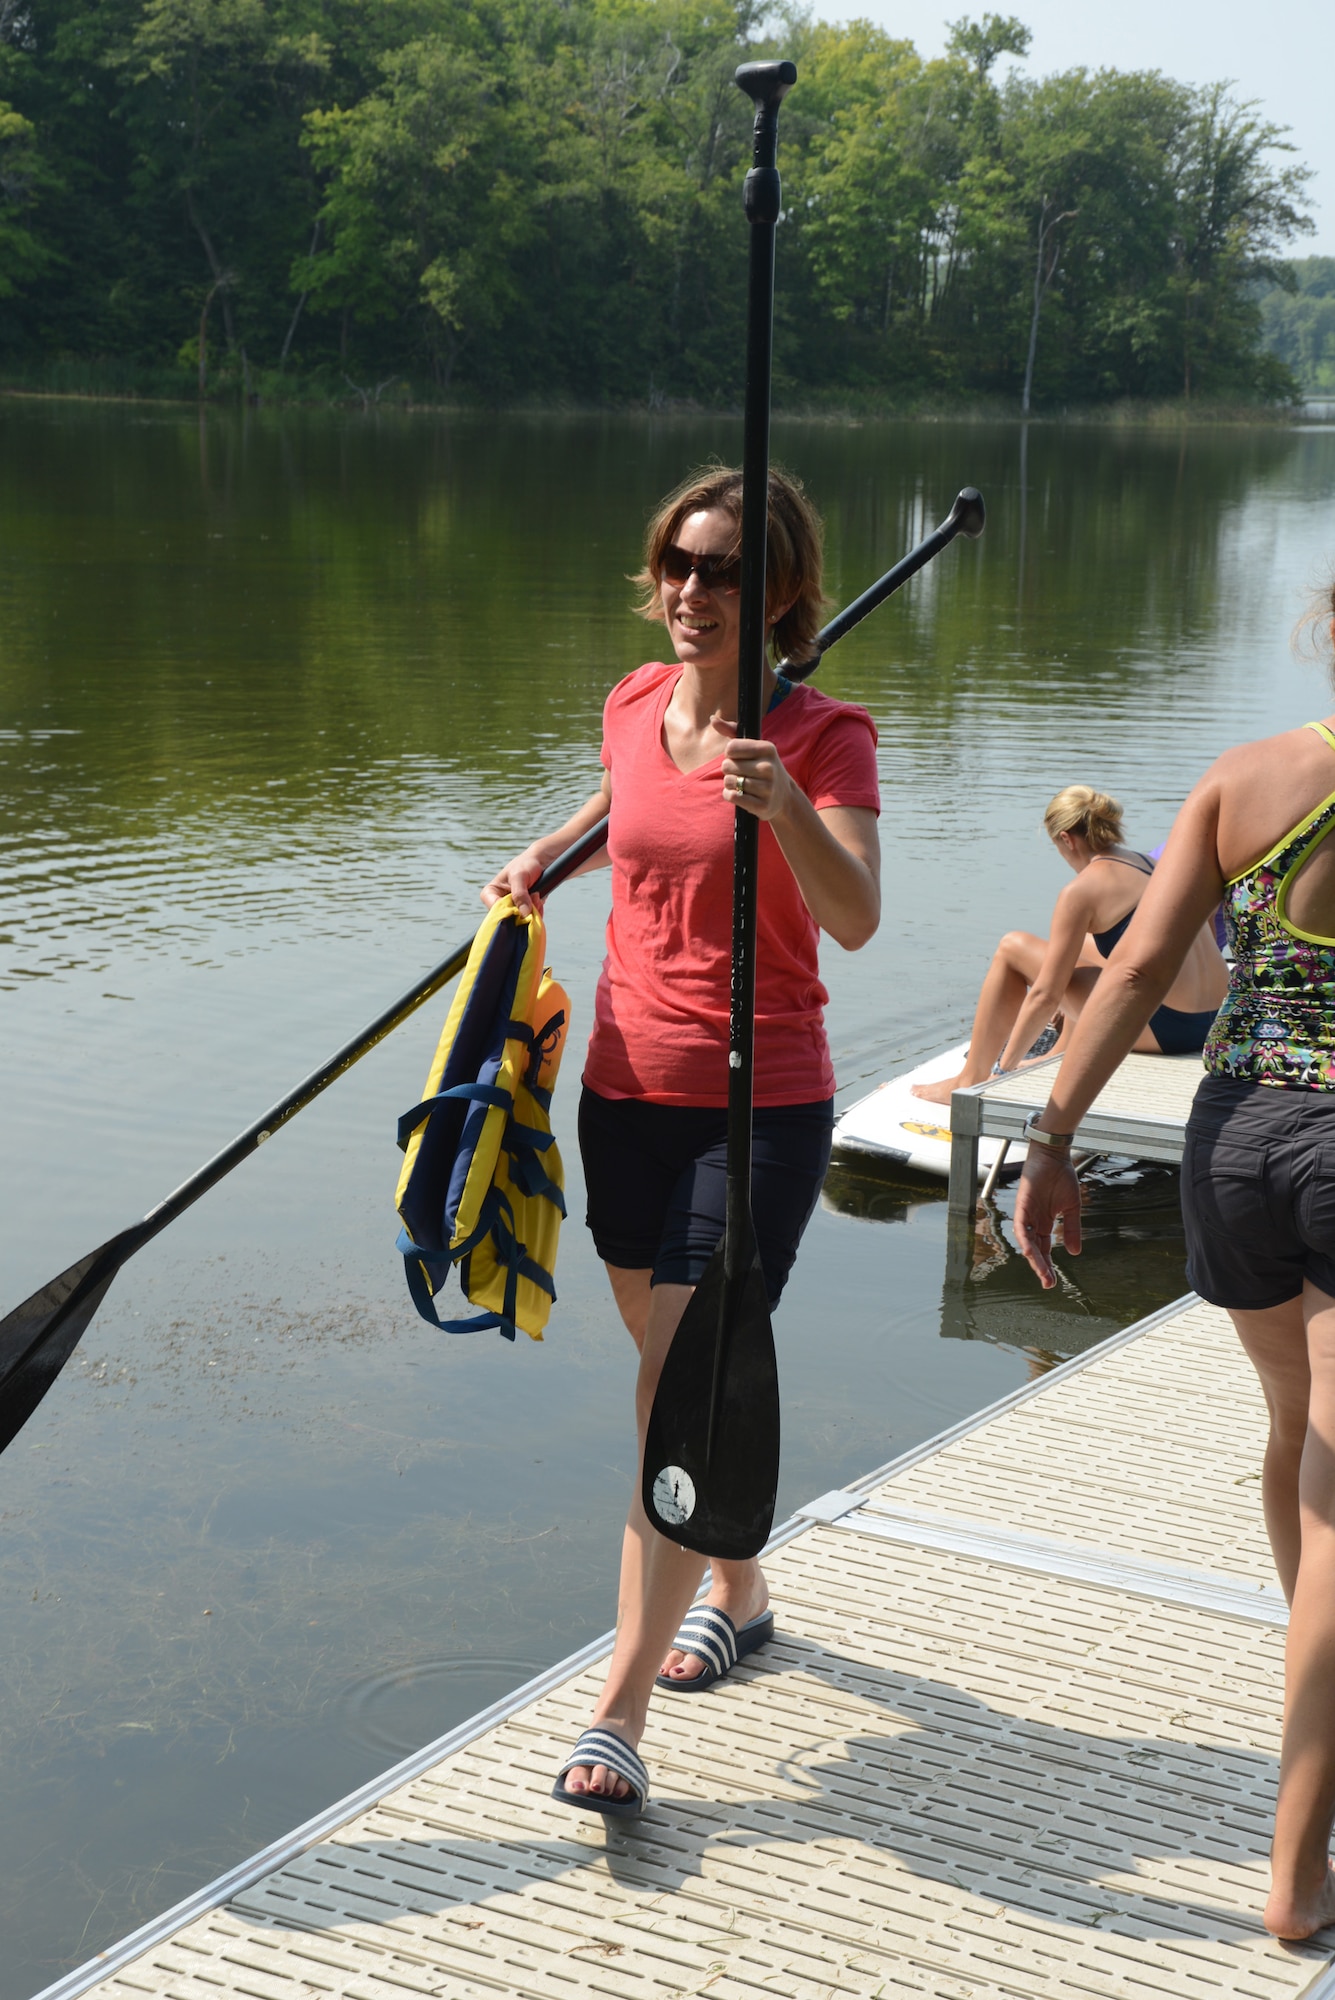 Lt. Col. Micaela Brancato of the 119th Wing carries paddles on the dock at Holbrook Farms Retreat, on Holbrook Lake, Minn., Aug. 1, 2014. Brancato and her husband Lt. Col. Matthew Brancato, also of the 119th Wing, run the retreat and are hosting widows of U.S. military members who lost their lives while serving their country. (U.S. Air Force photo/Senior Master Sgt. David H. Lipp)